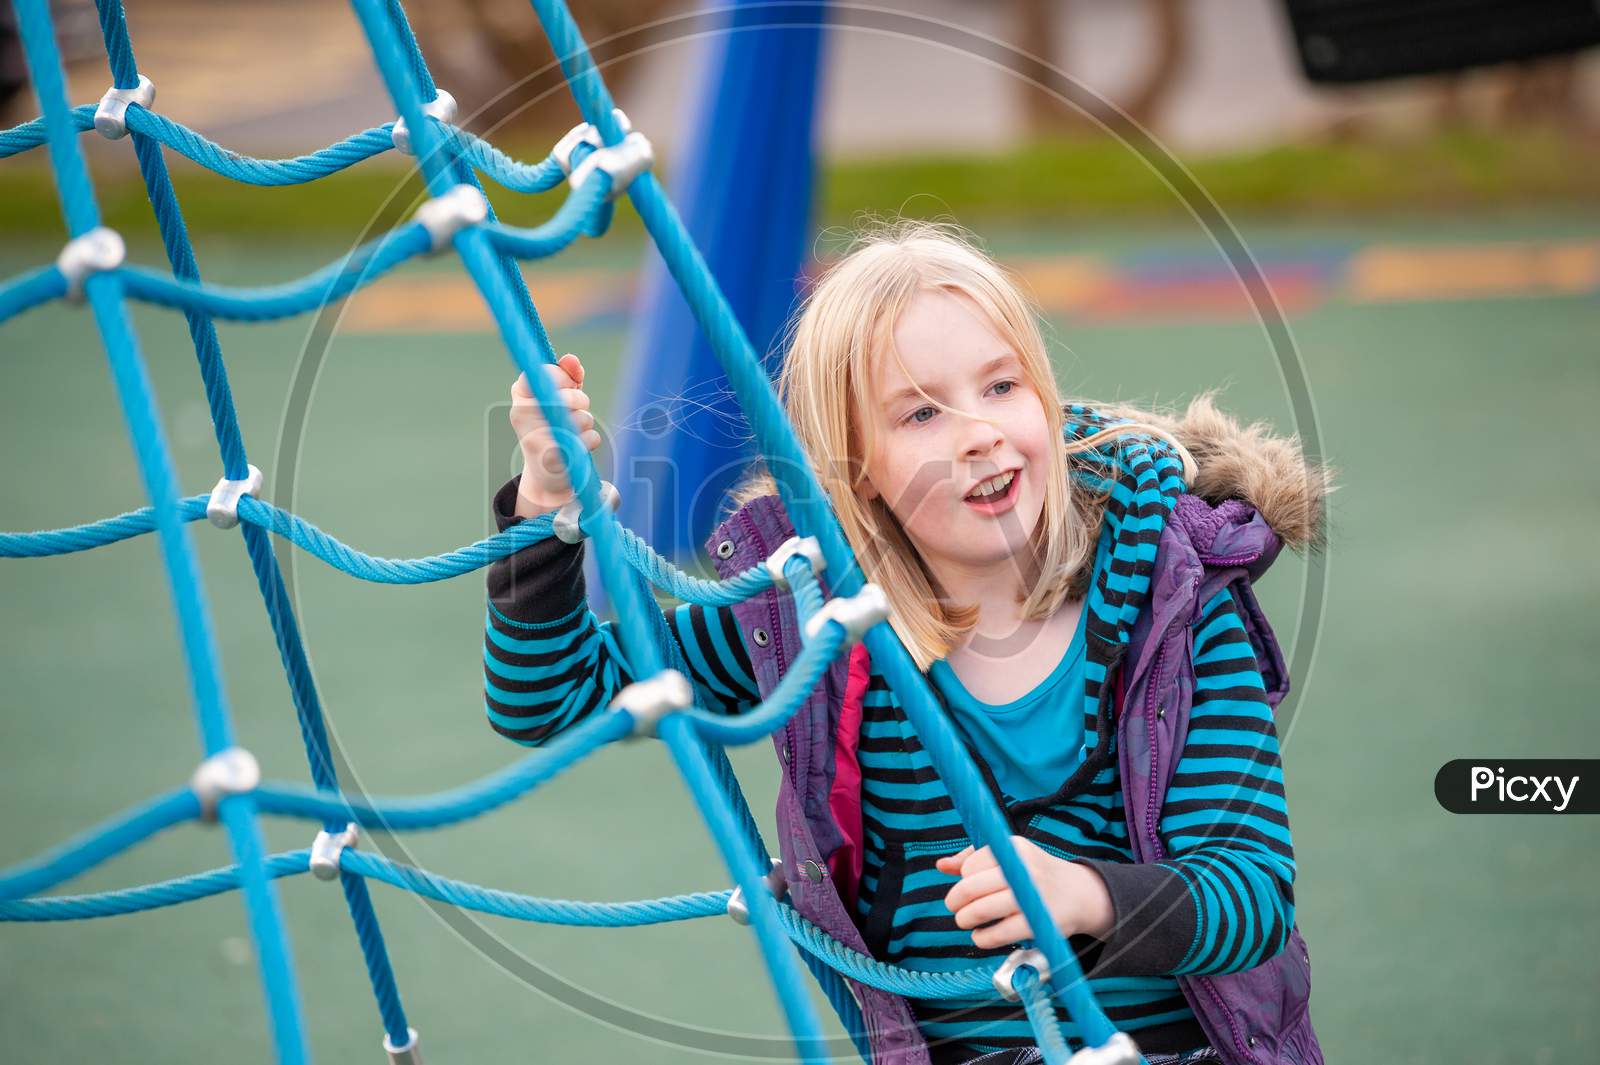 A Happy Young Blonde Girl On A Blue Rope Ladder In A Playground